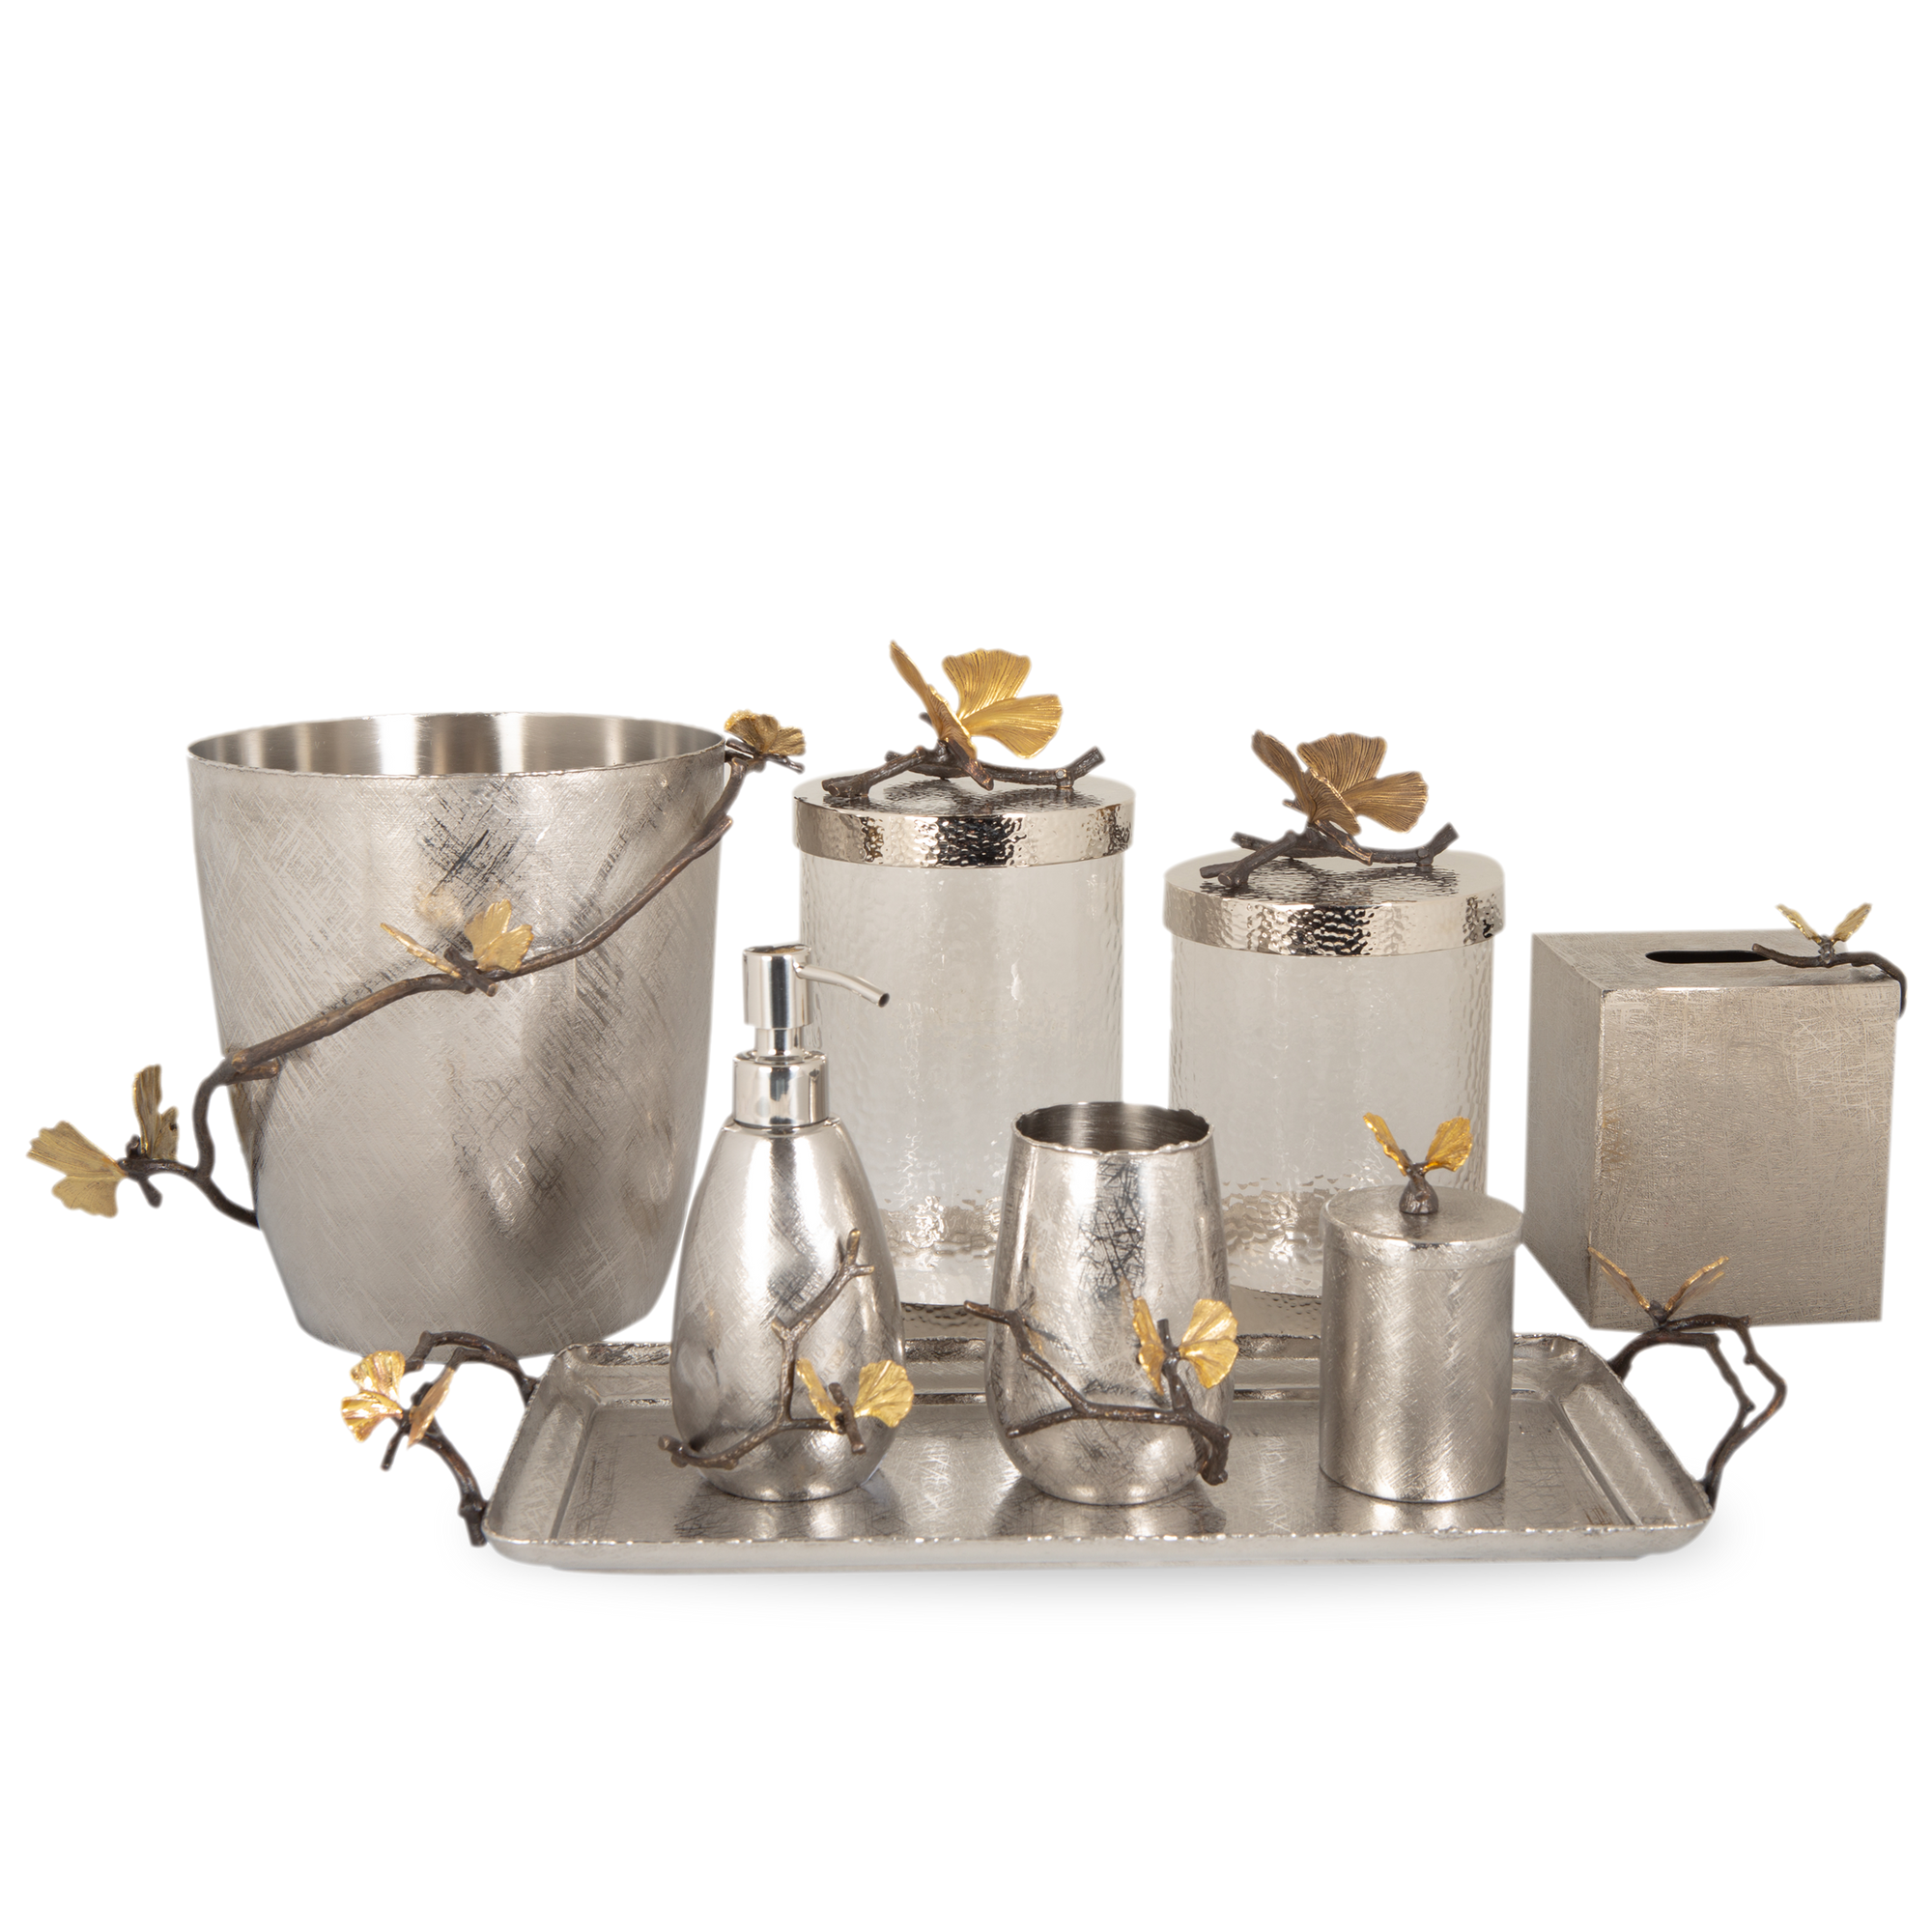 The Butterfly Ginko Collection is inspired by the ginkgo tree's butterfly shaped leaves.